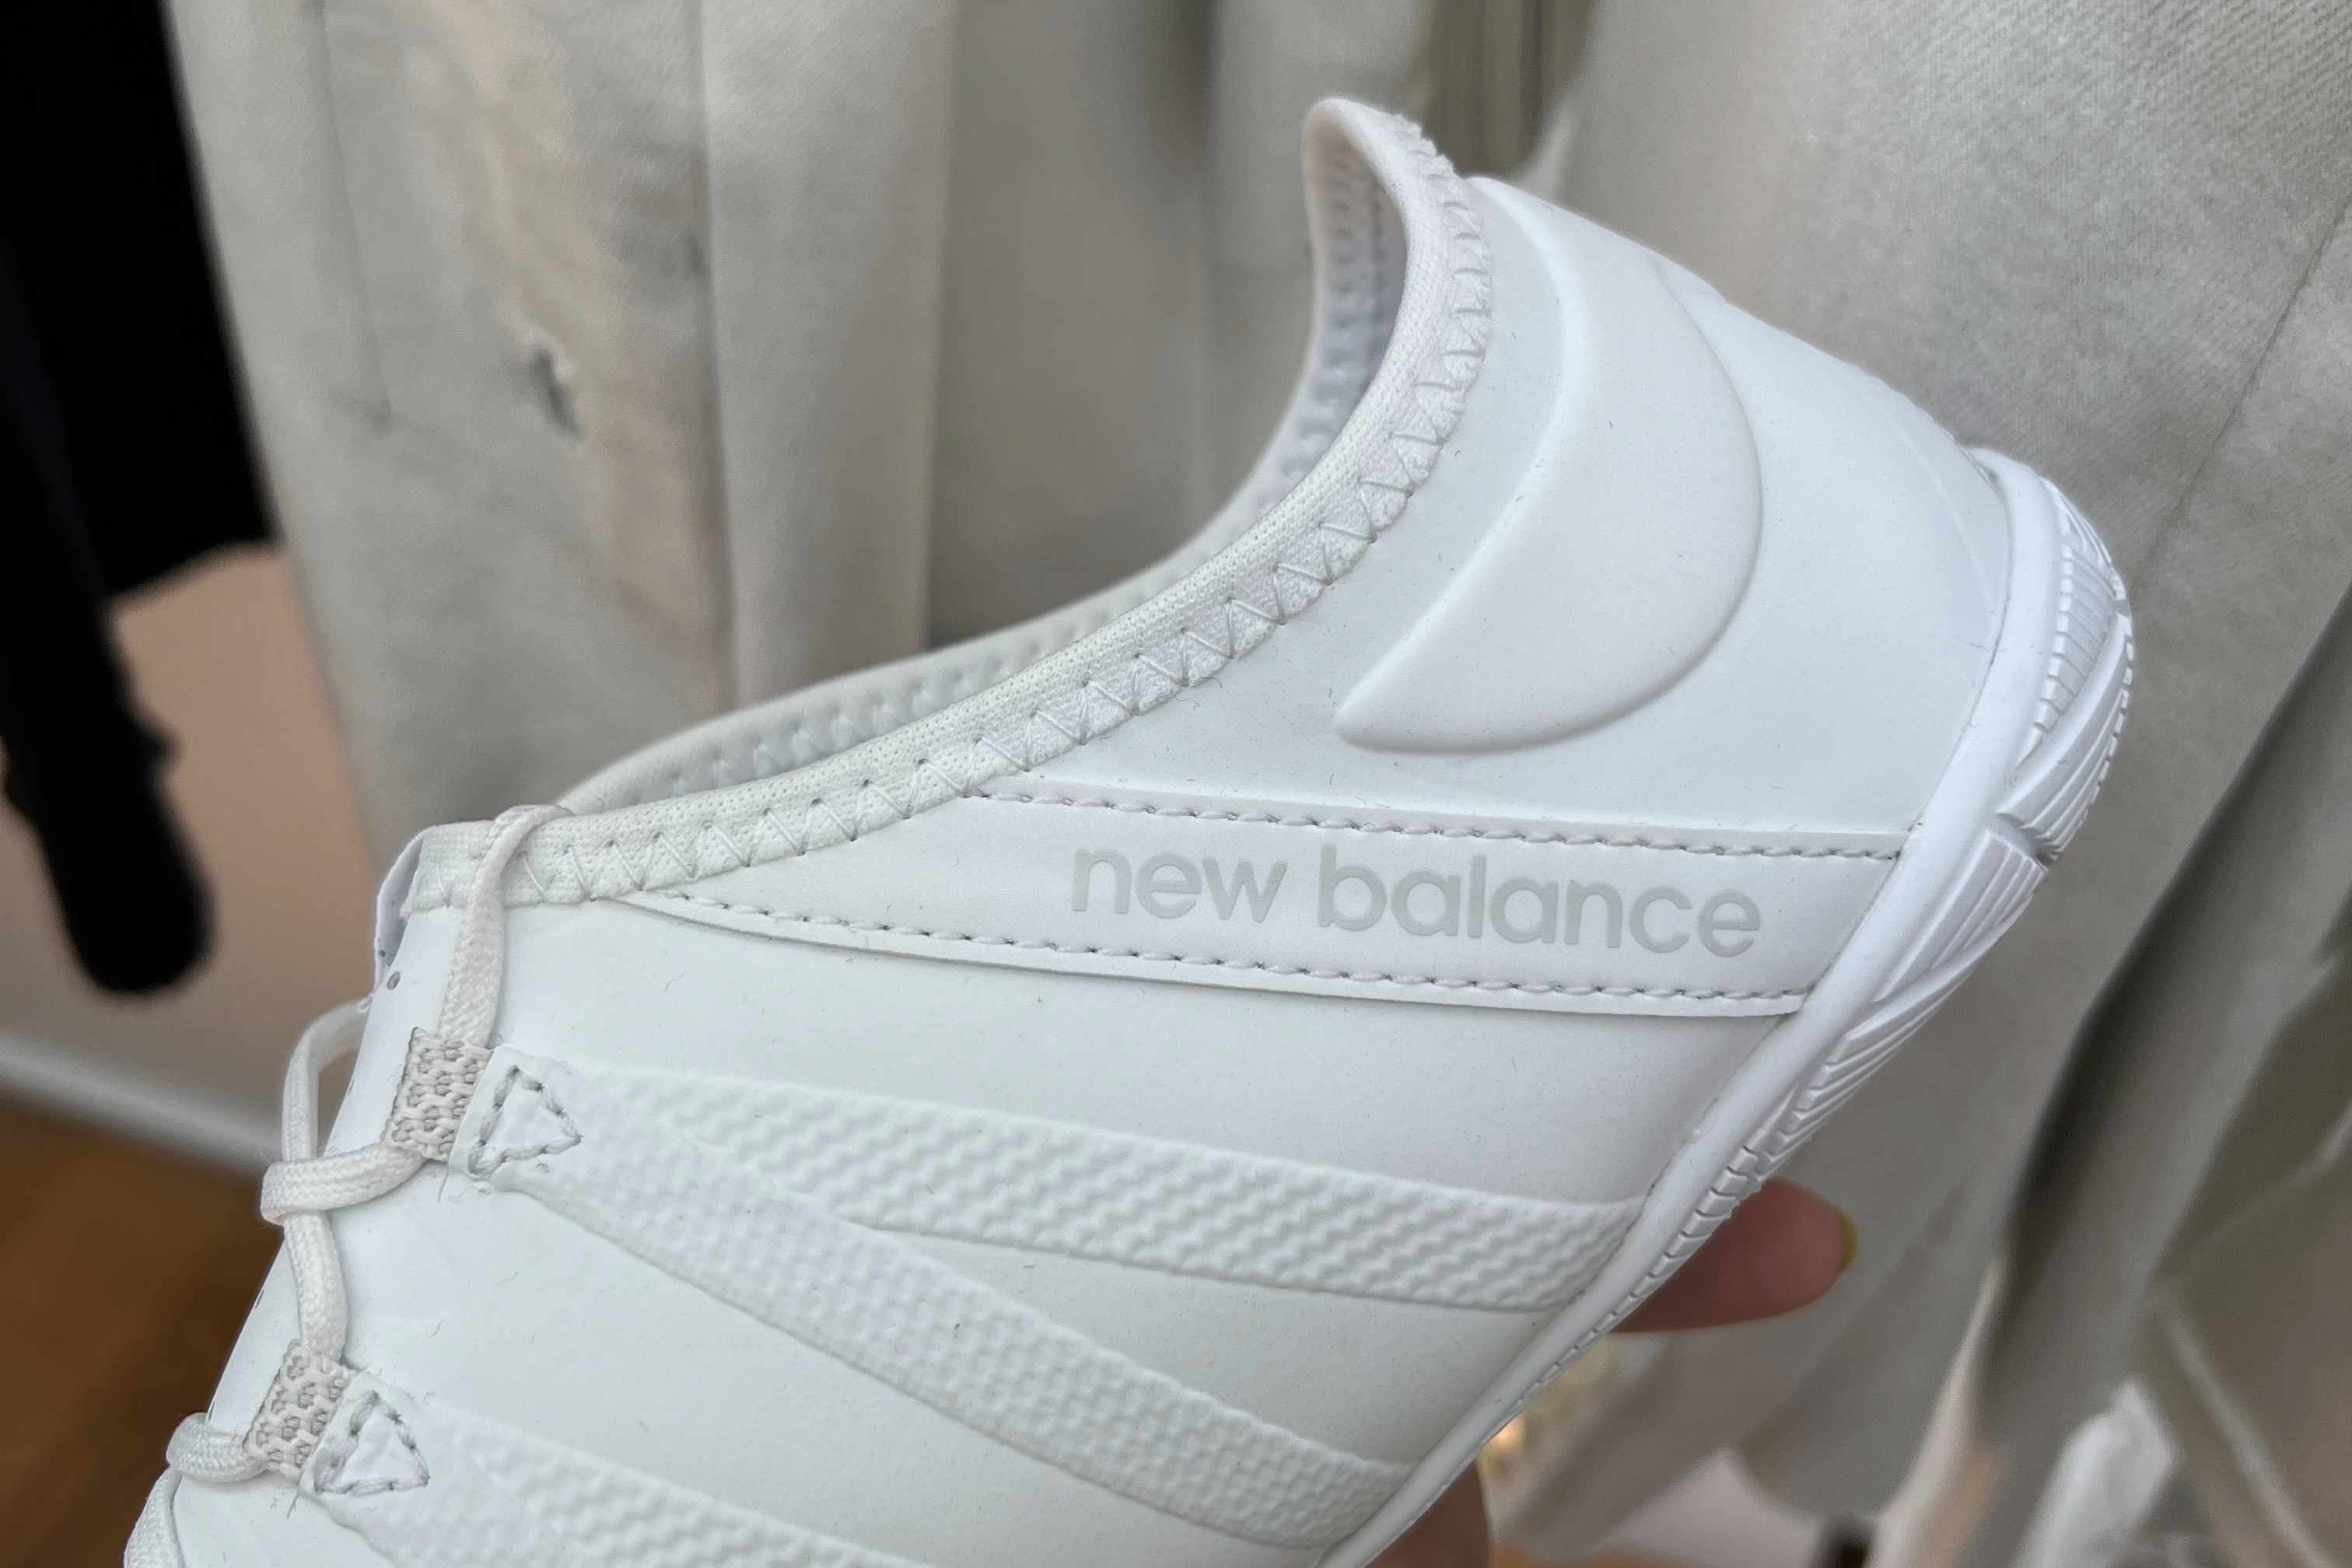 Junya Watanabe's New Balance sneaker collab for the SS25 menswear collection